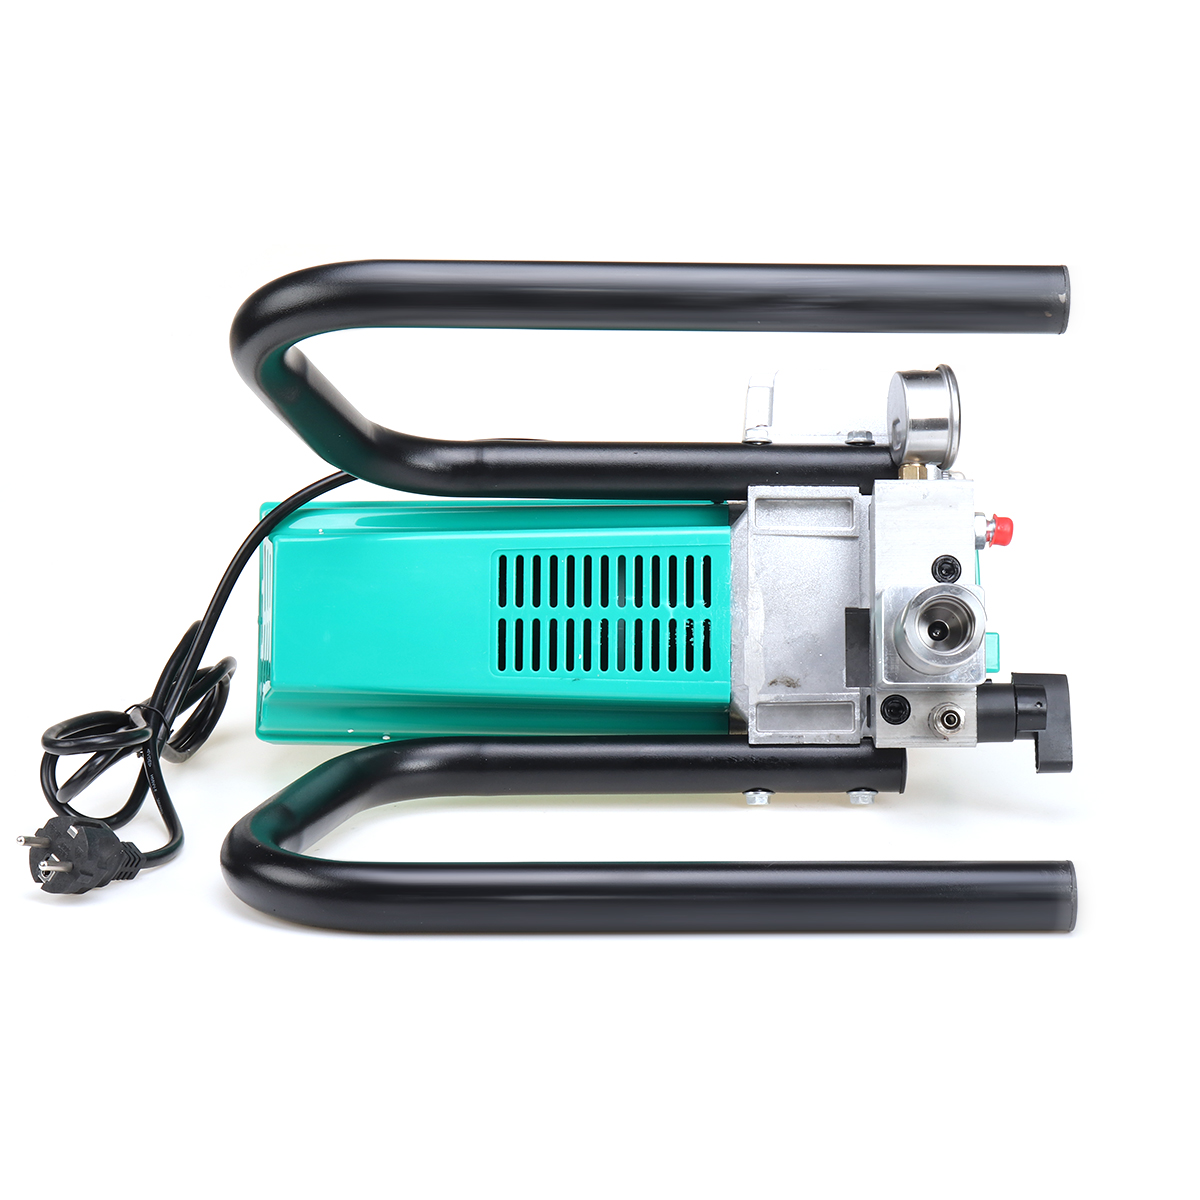 Find Drillrpo Professional Airless Spraying Machine Airless Spray Gun 2 8L Brushless Motor Airless Paint Sprayer Painting Machine for Sale on Gipsybee.com with cryptocurrencies